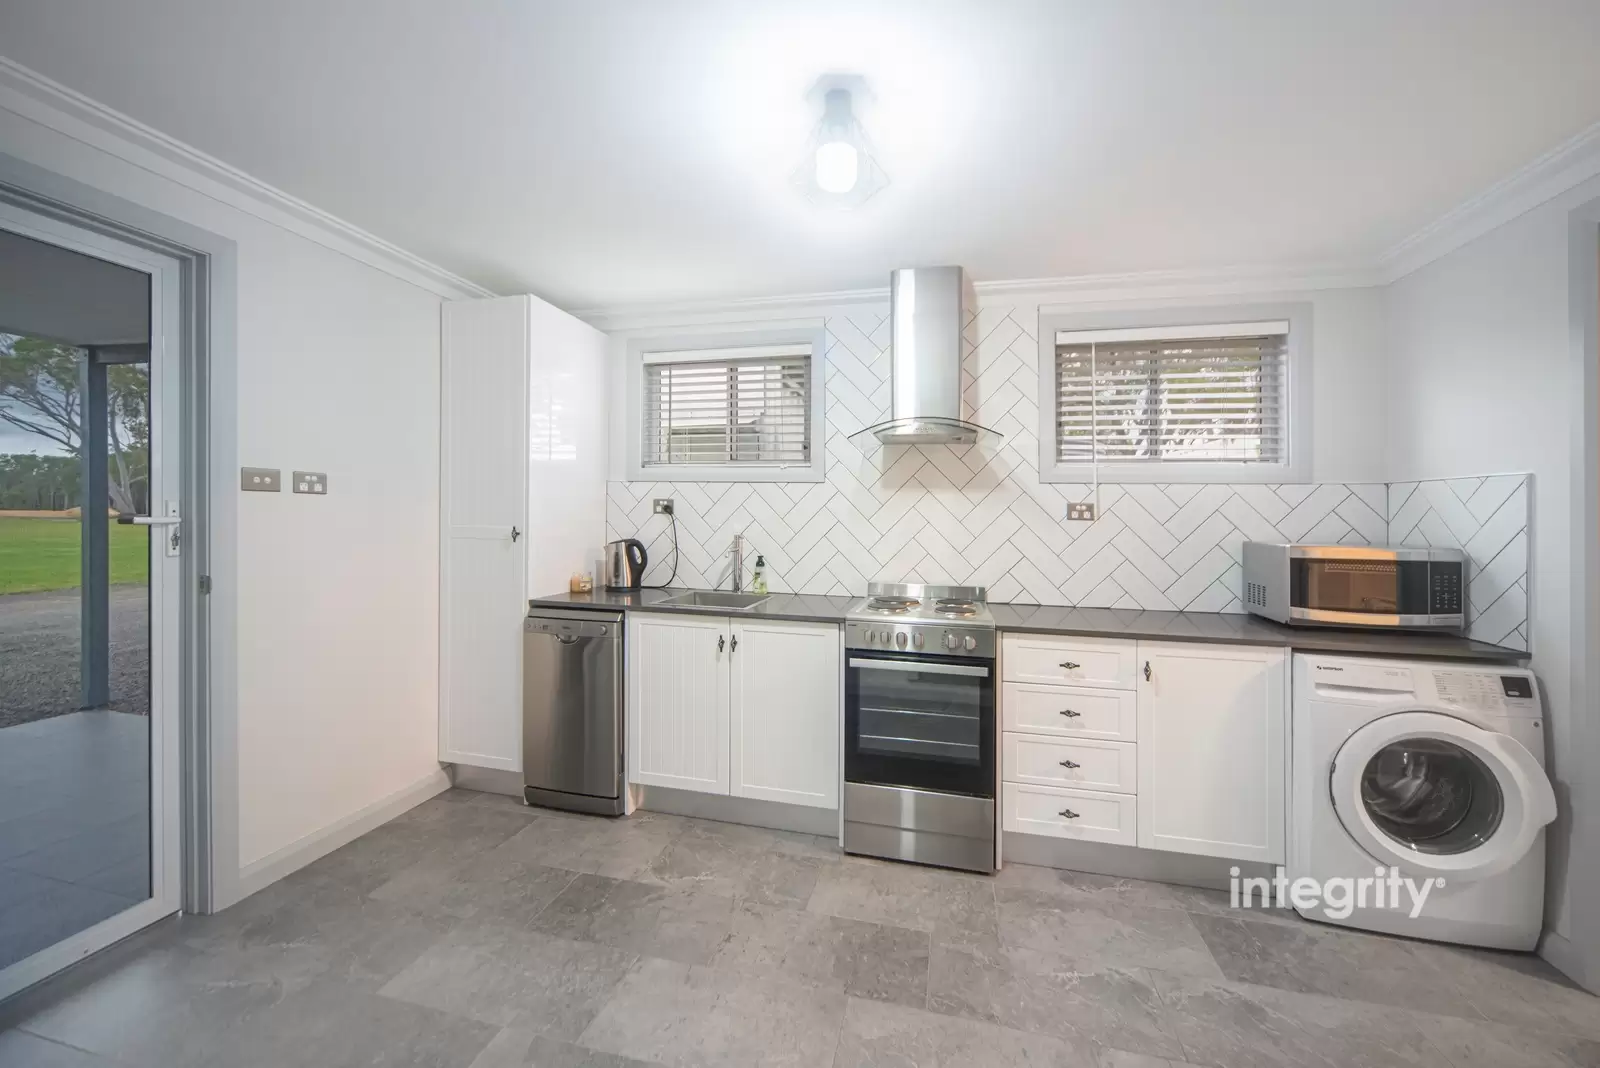 243 Turpentine Road, Tomerong For Sale by Integrity Real Estate - image 15